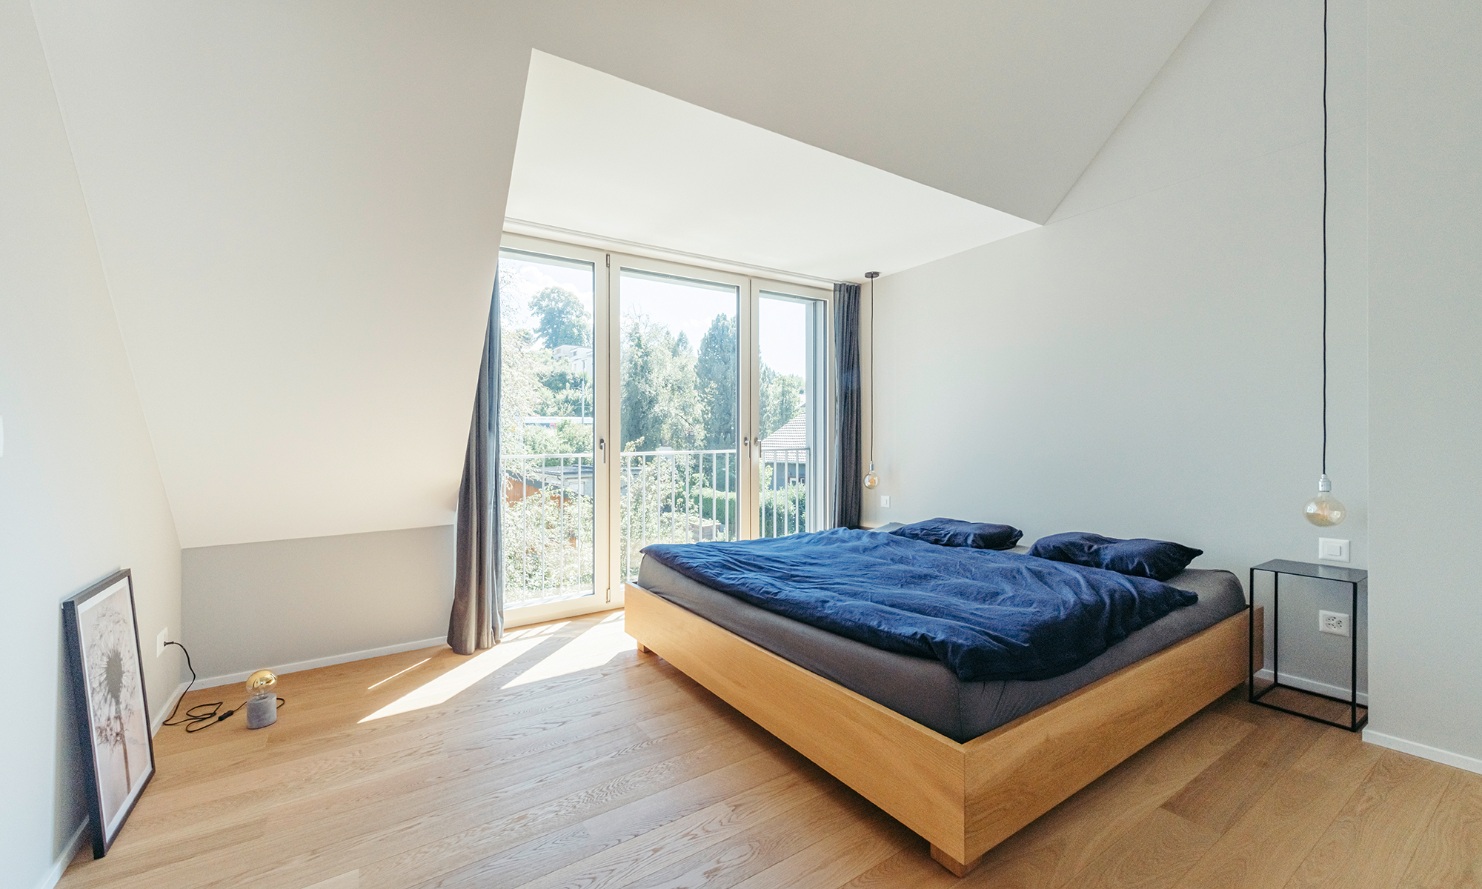 Bright bedroom with double bed and parquet flooring in the added storey of the detached house